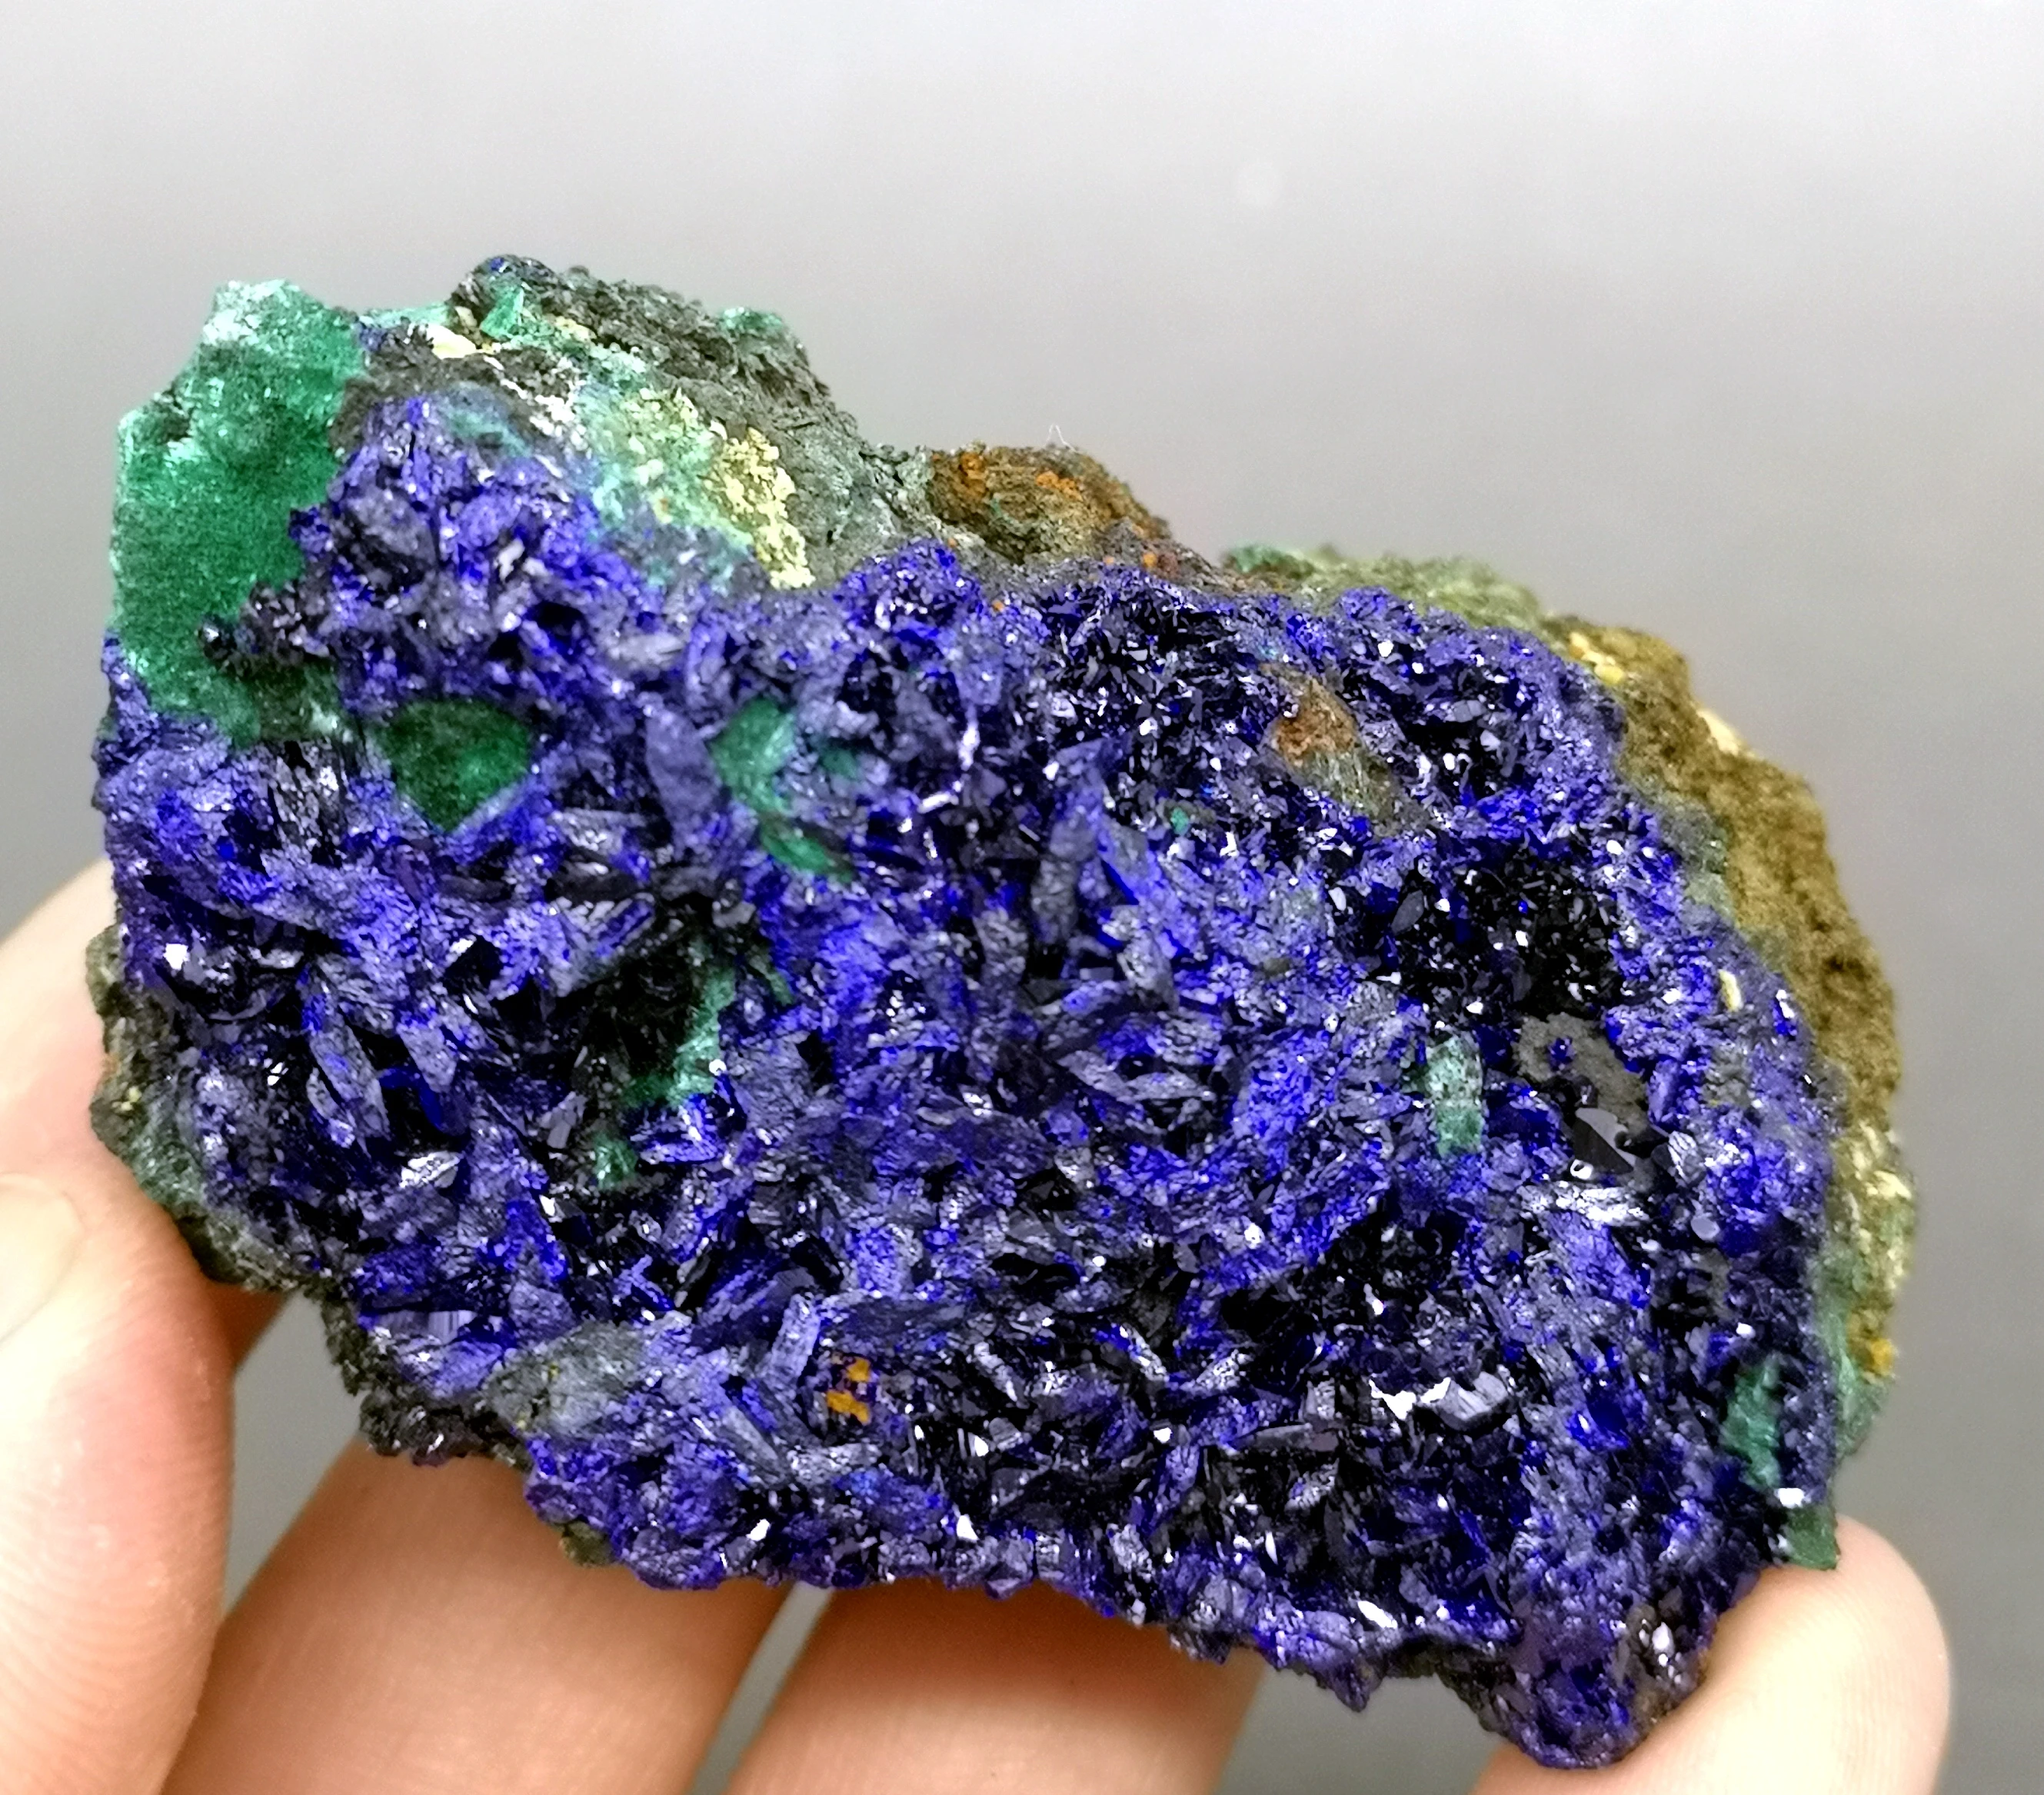 Best! 99g Natural stone shiny azurite and malachite symbiotic mineral crystal specimens Stones and crystals from China